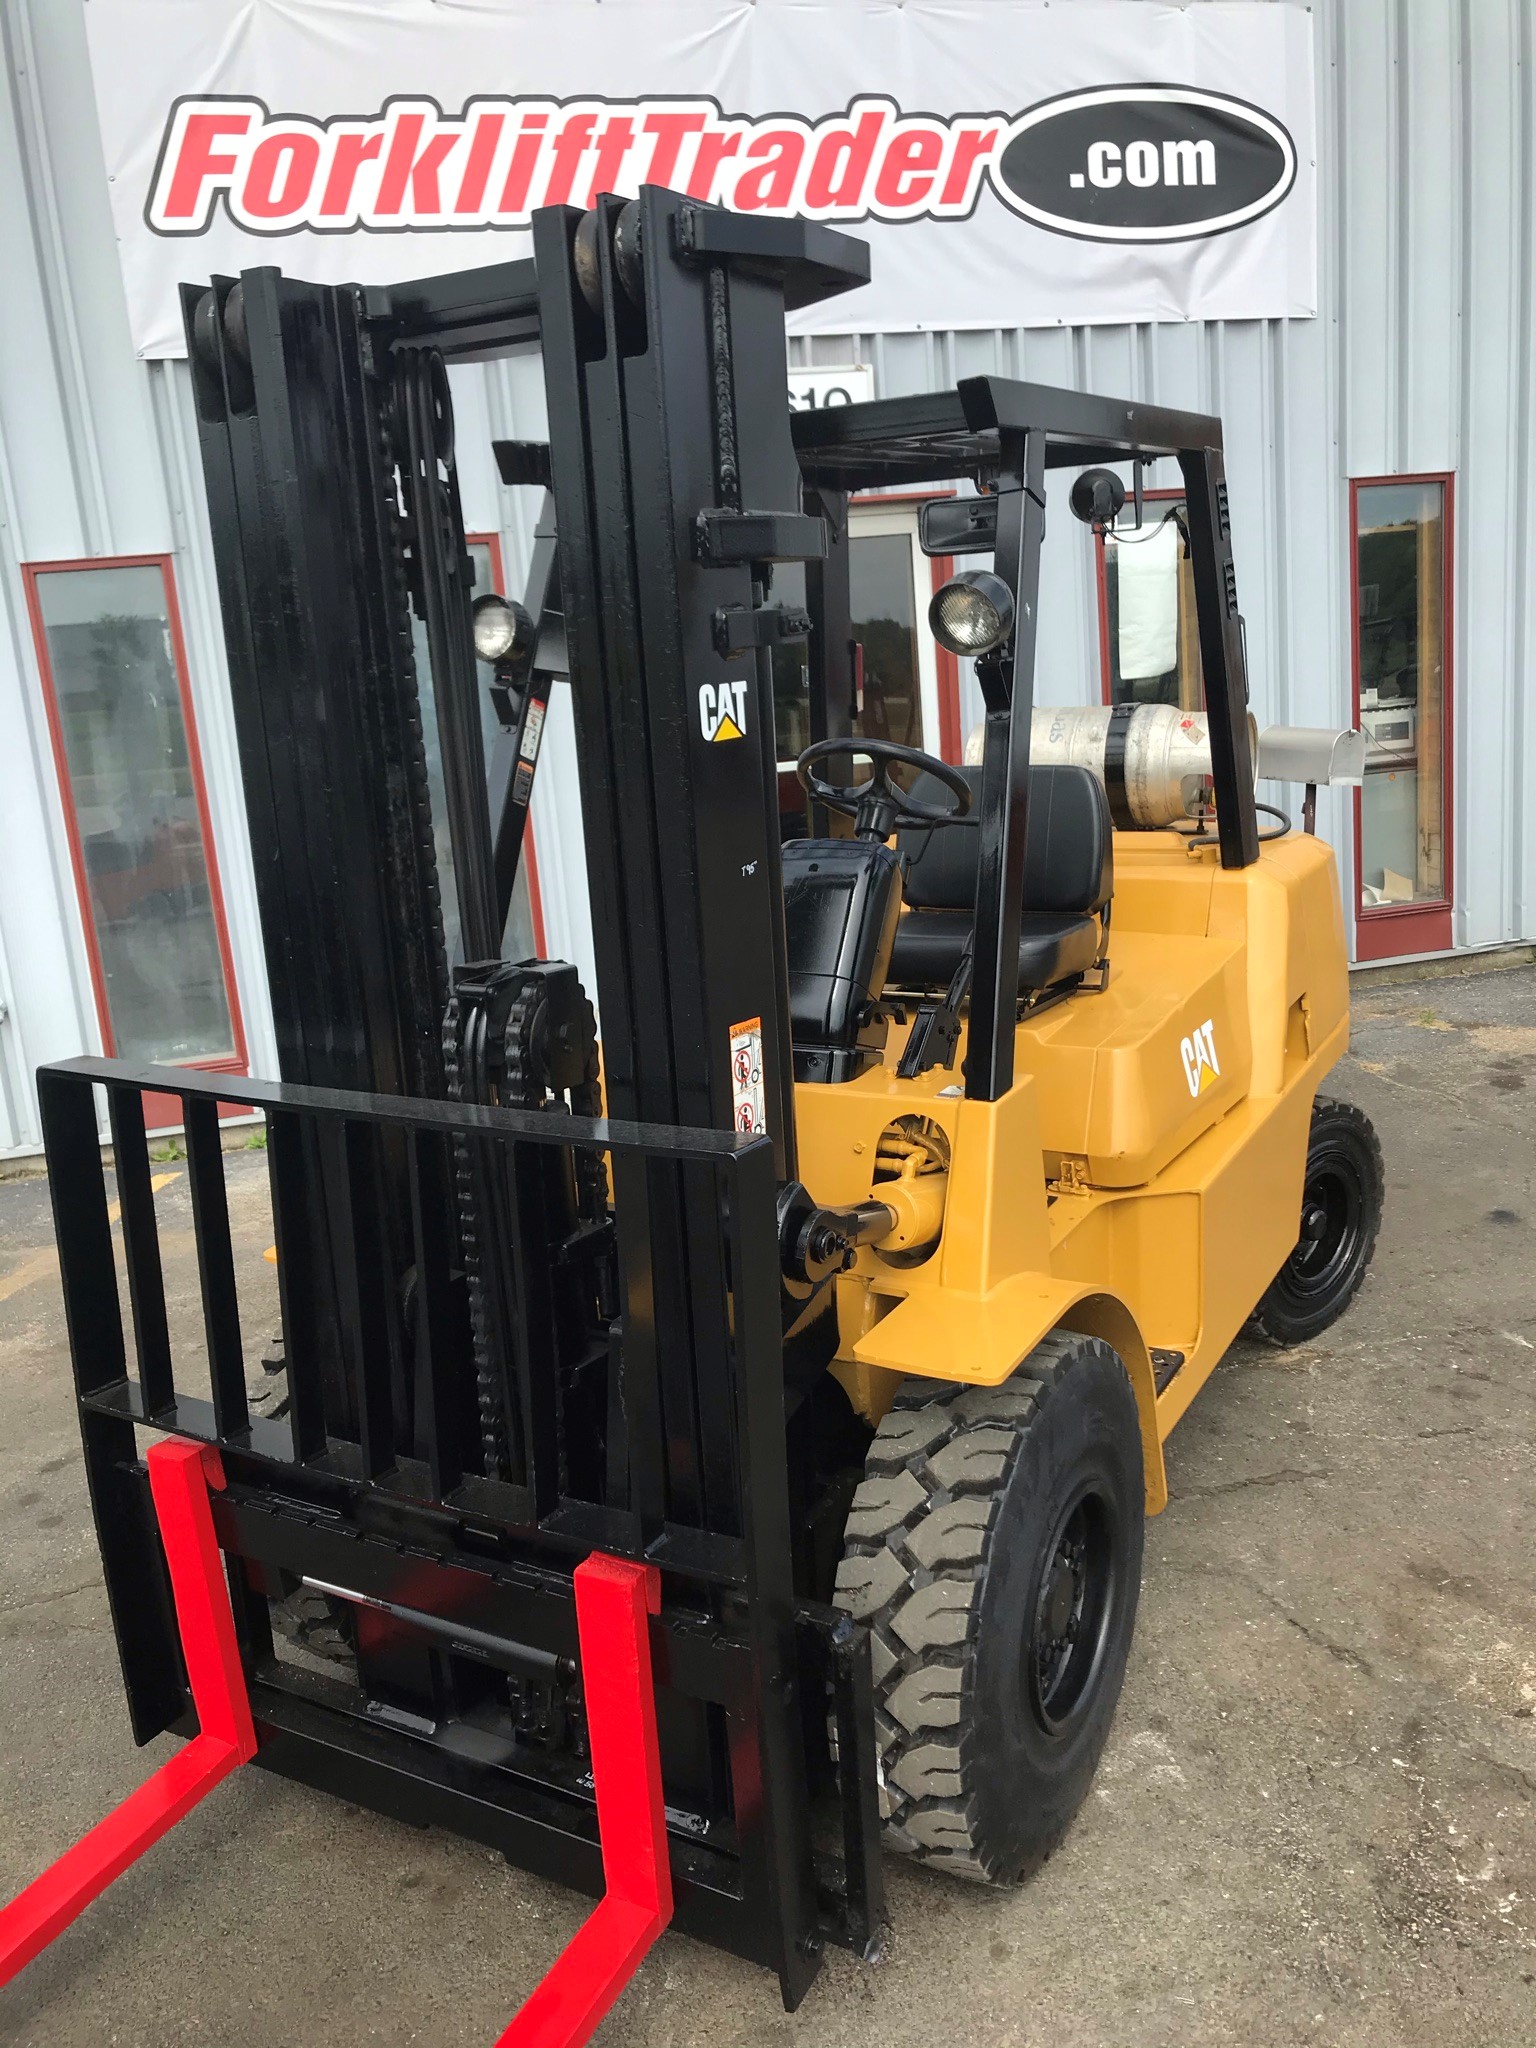 48" forks yellow caterpillar forklift for sale